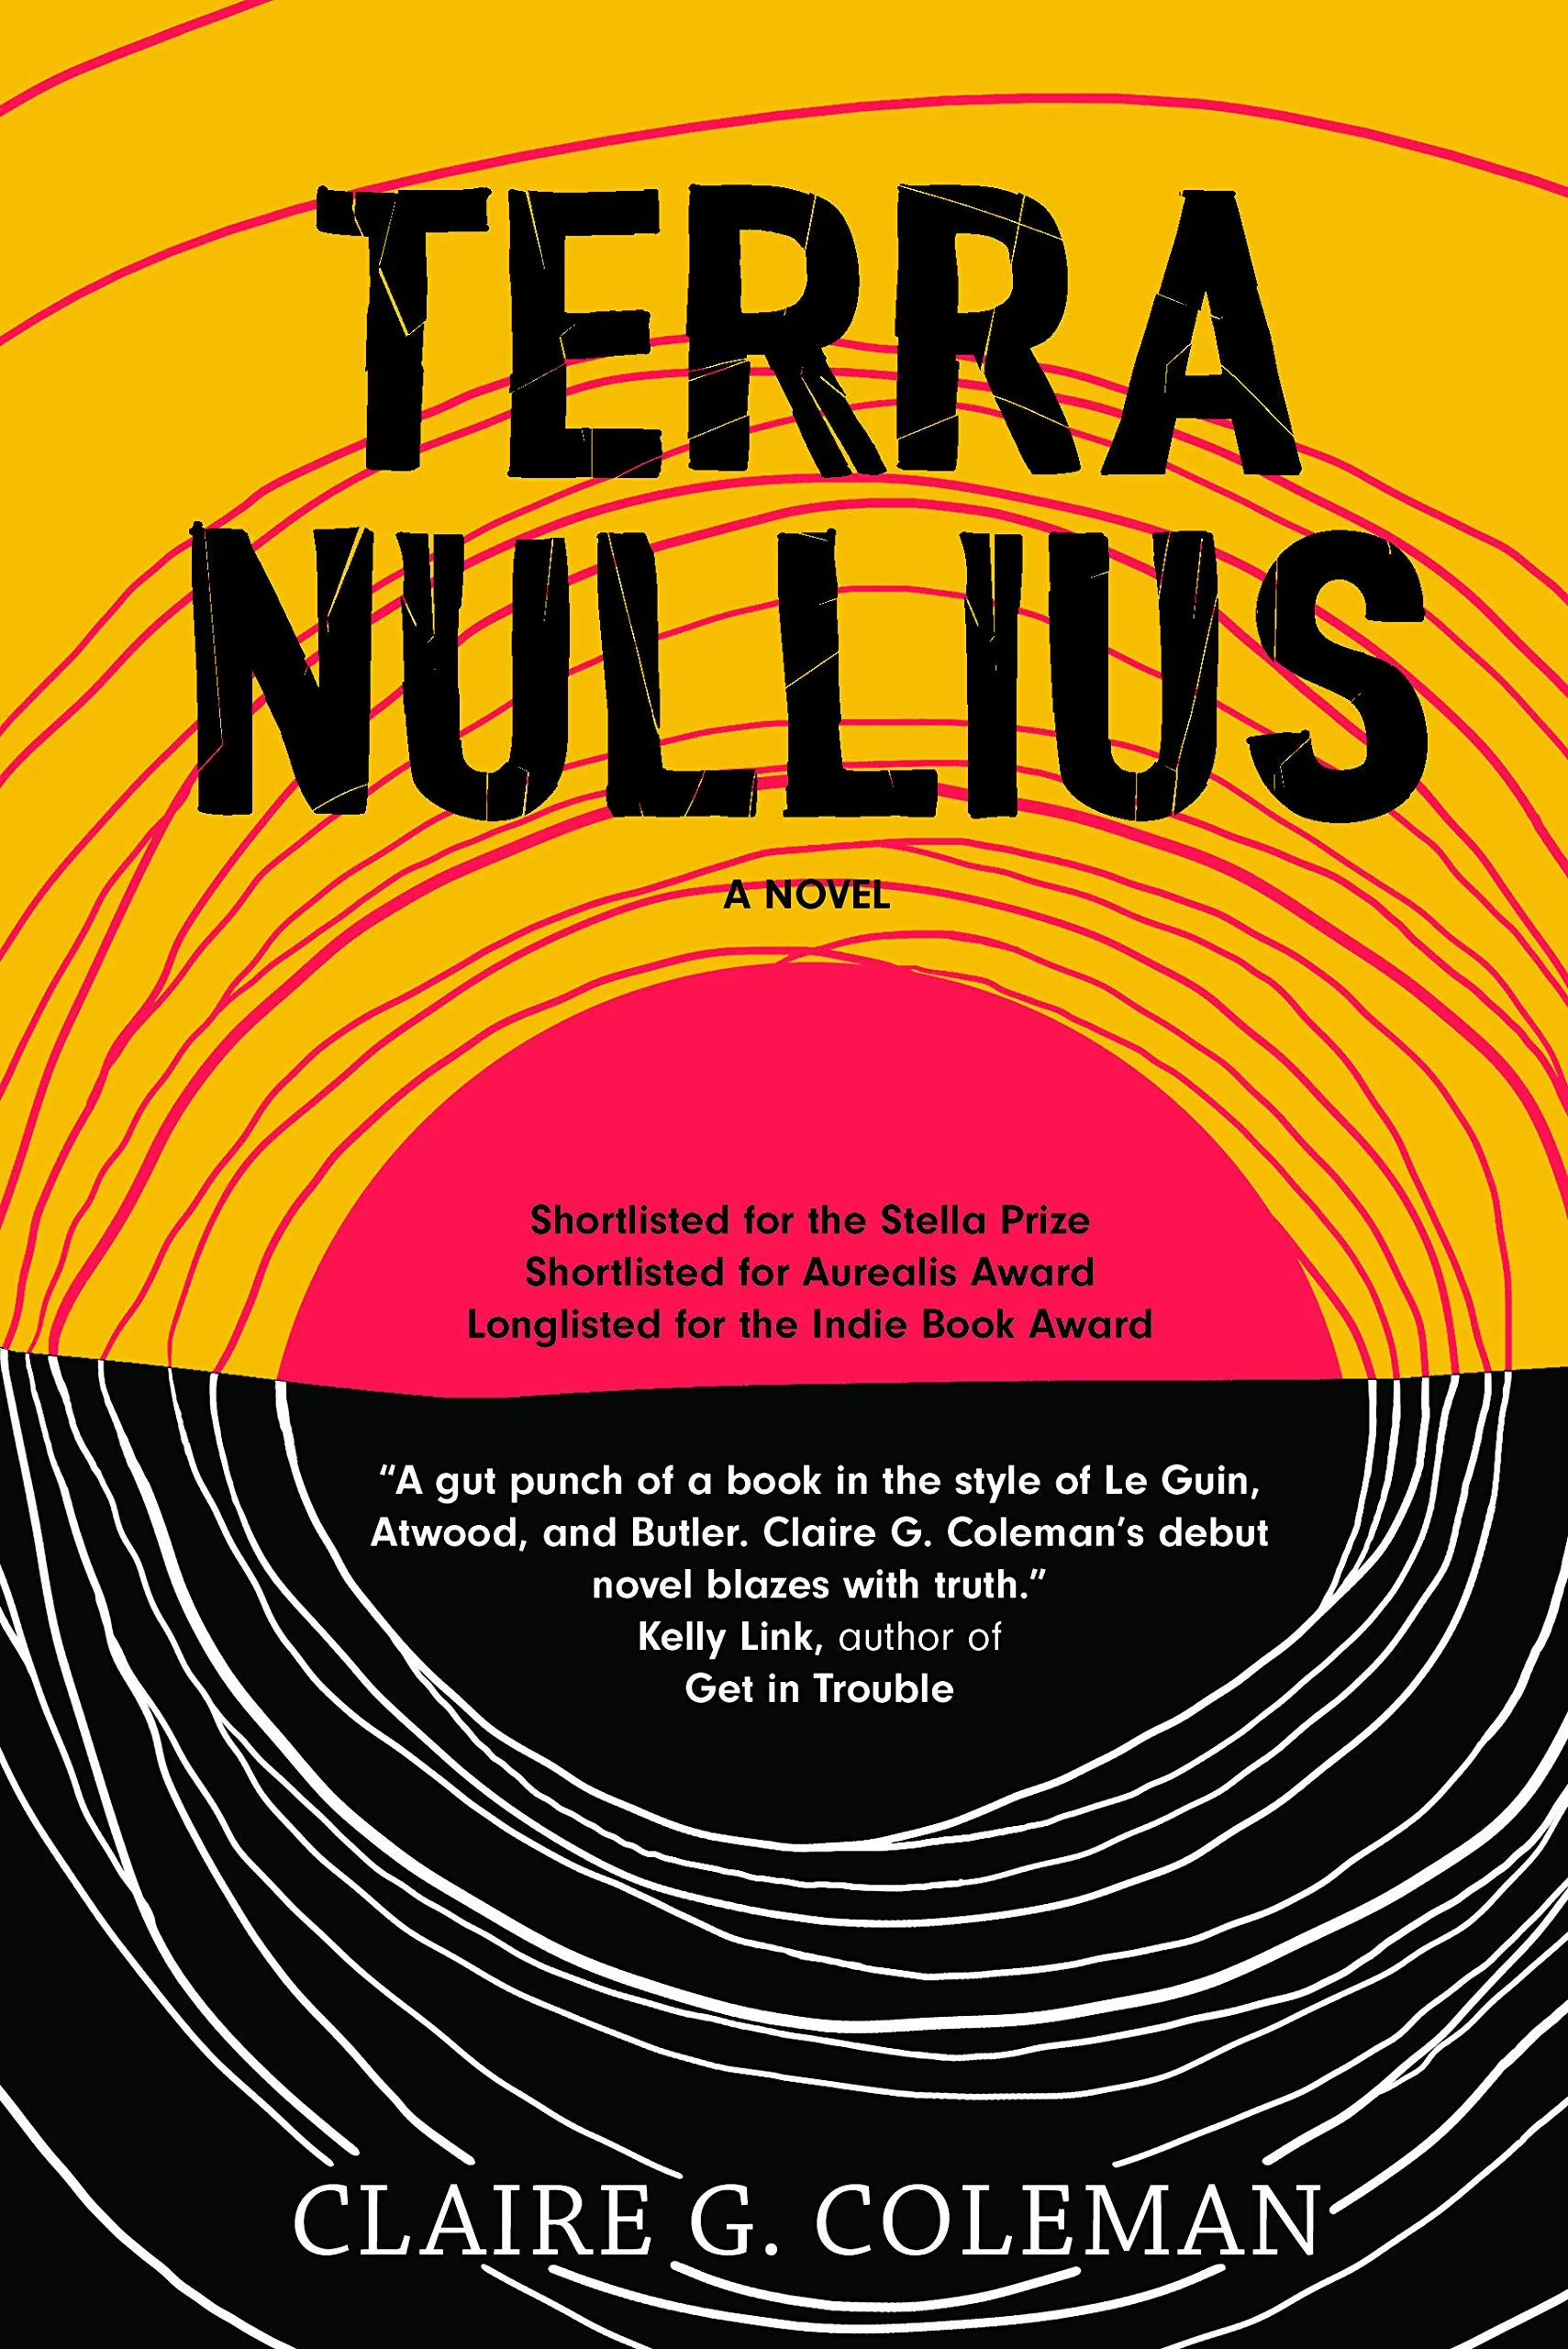 A graphic of the cover of Terra Nullius by Claire G. Coleman